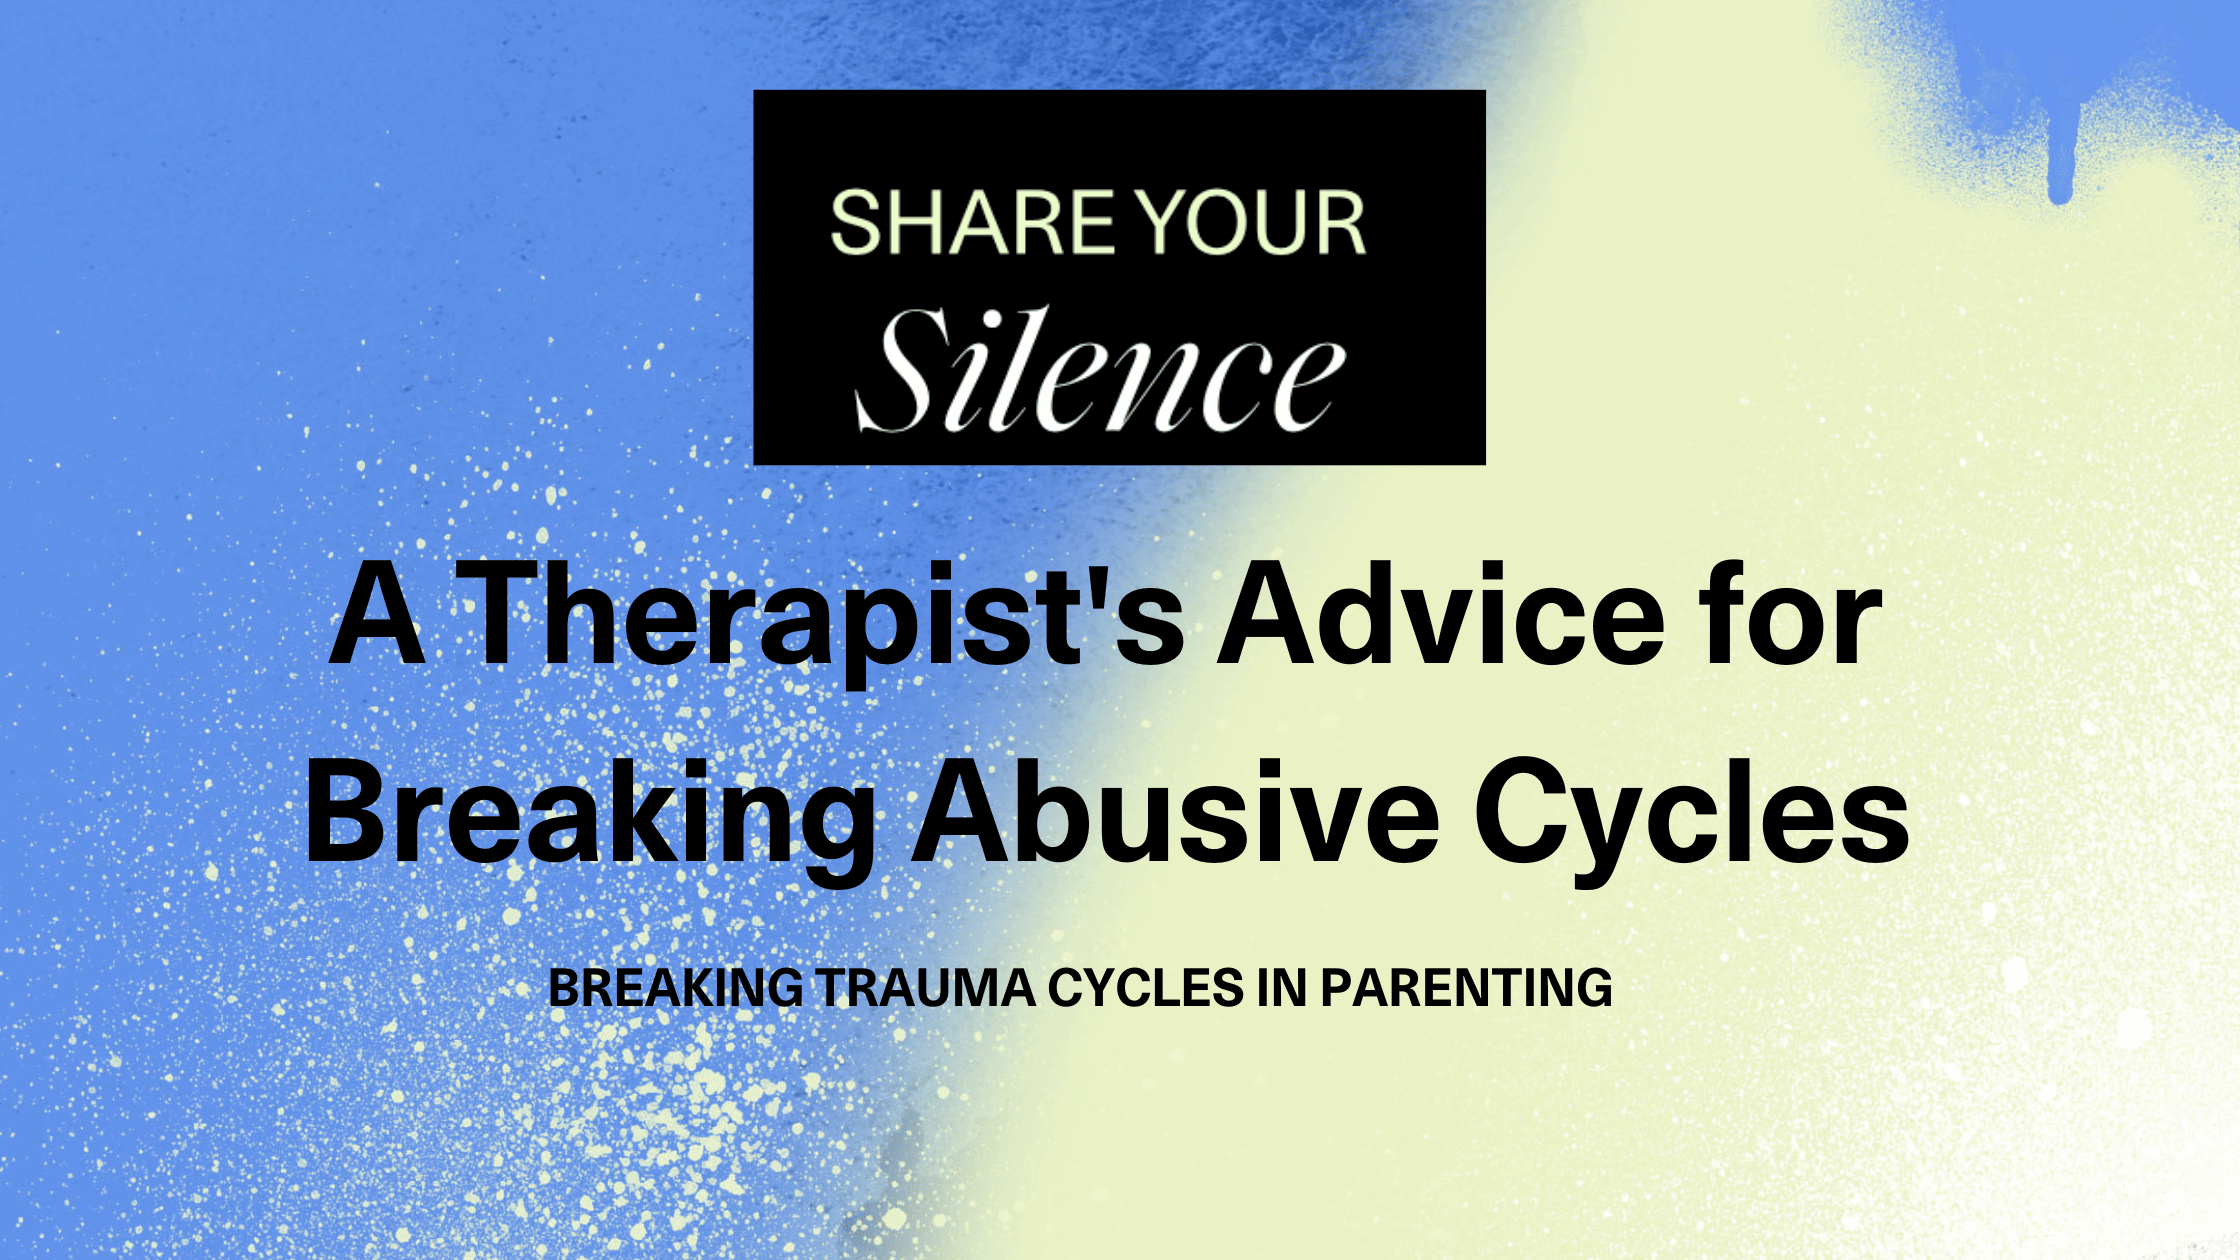 Breaking Trauma Cycles in Parenting